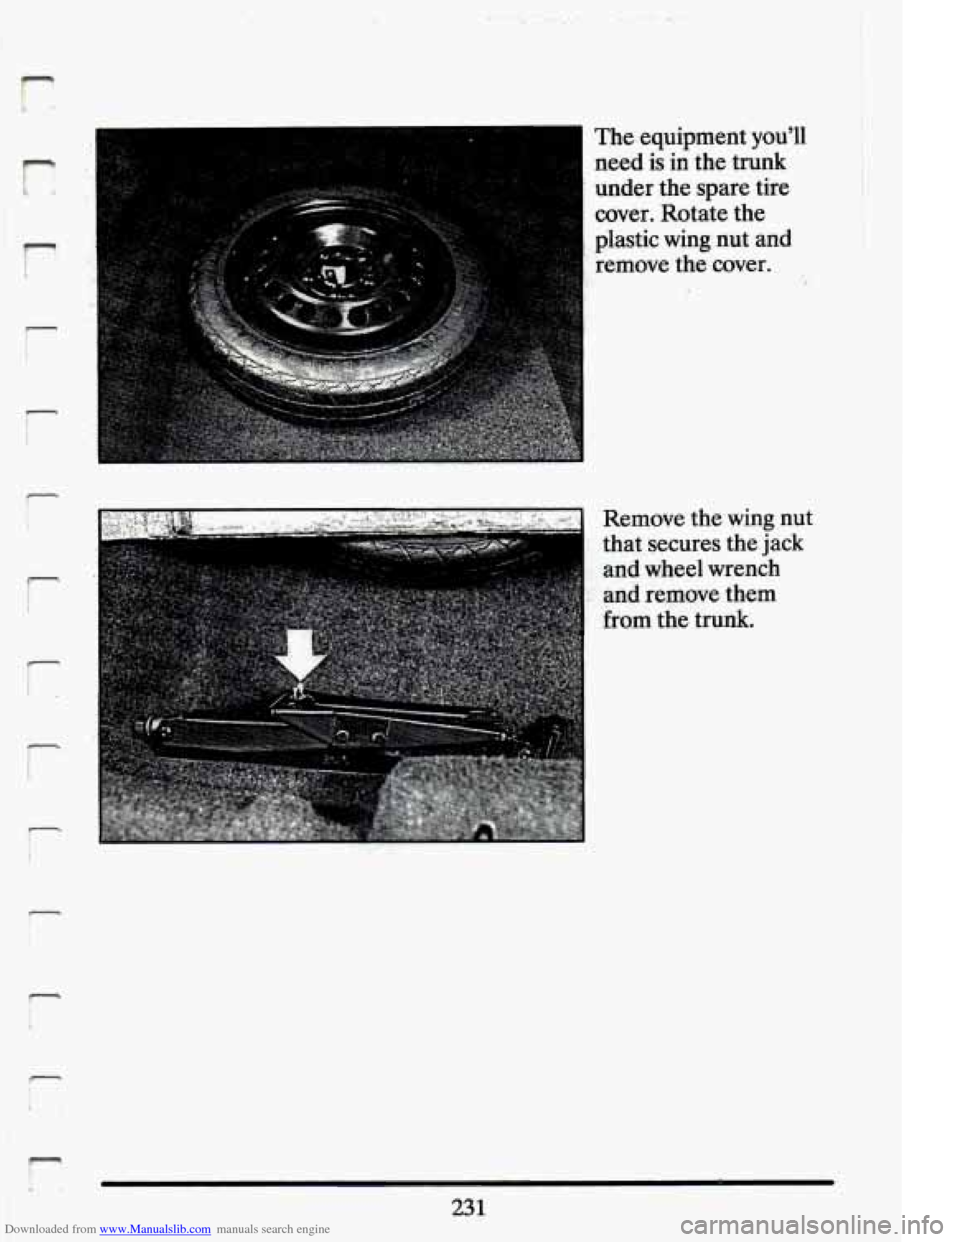 CADILLAC ELDORADO 1994 10.G Owners Manual Downloaded from www.Manualslib.com manuals search engine i 
r 
c 
I The.  equipment  youll need  is  in  the  trunk 
under  the  spare  tire 
cover.  Rotate  the 
plastic  wing-  nut  and 
remove  th